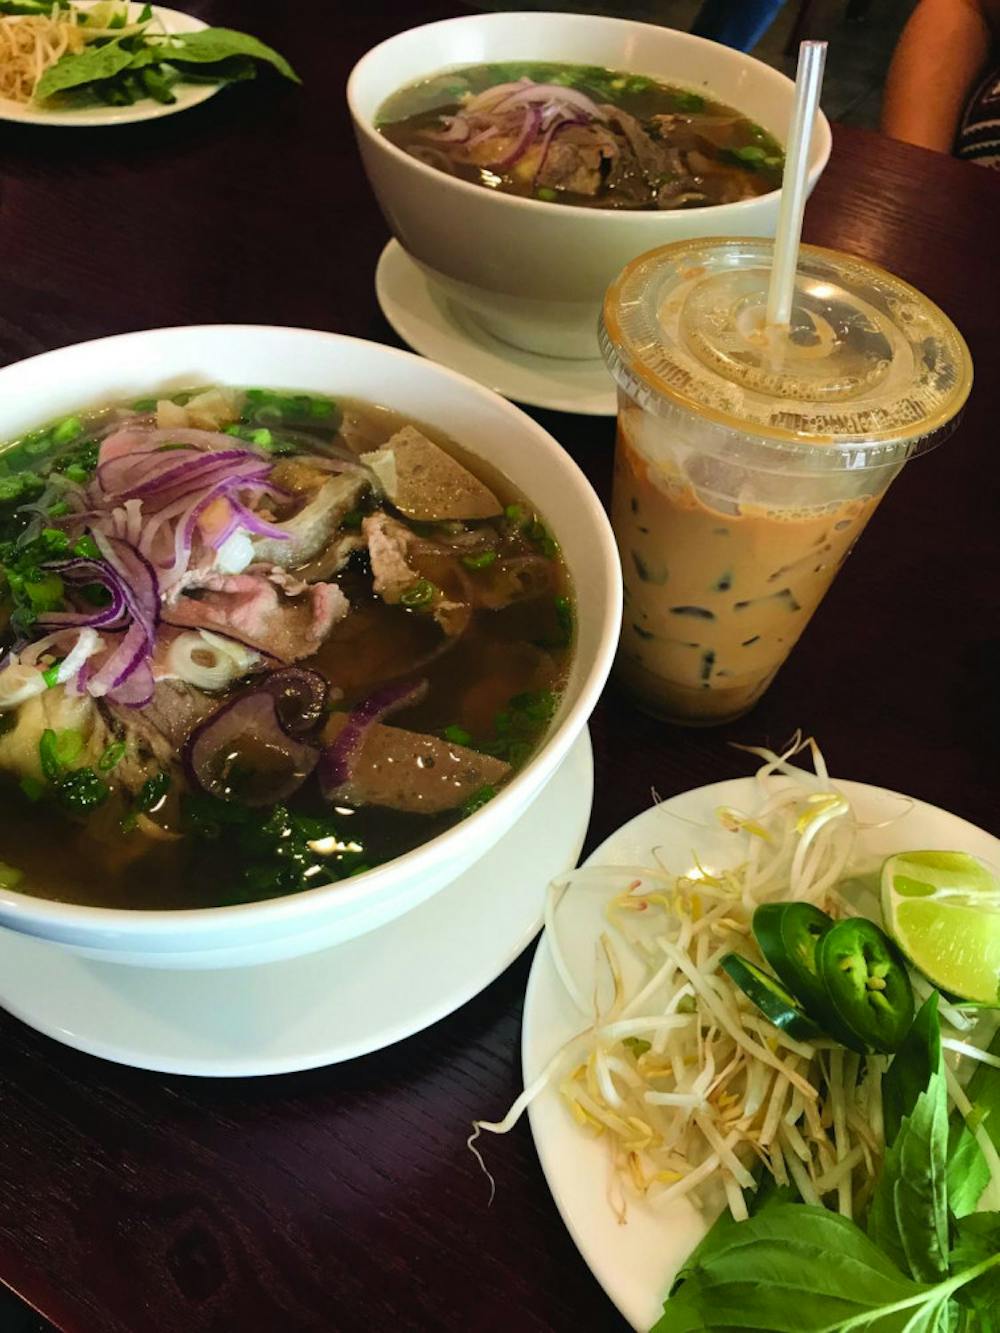 Le Pho offers many varieties of pho options.